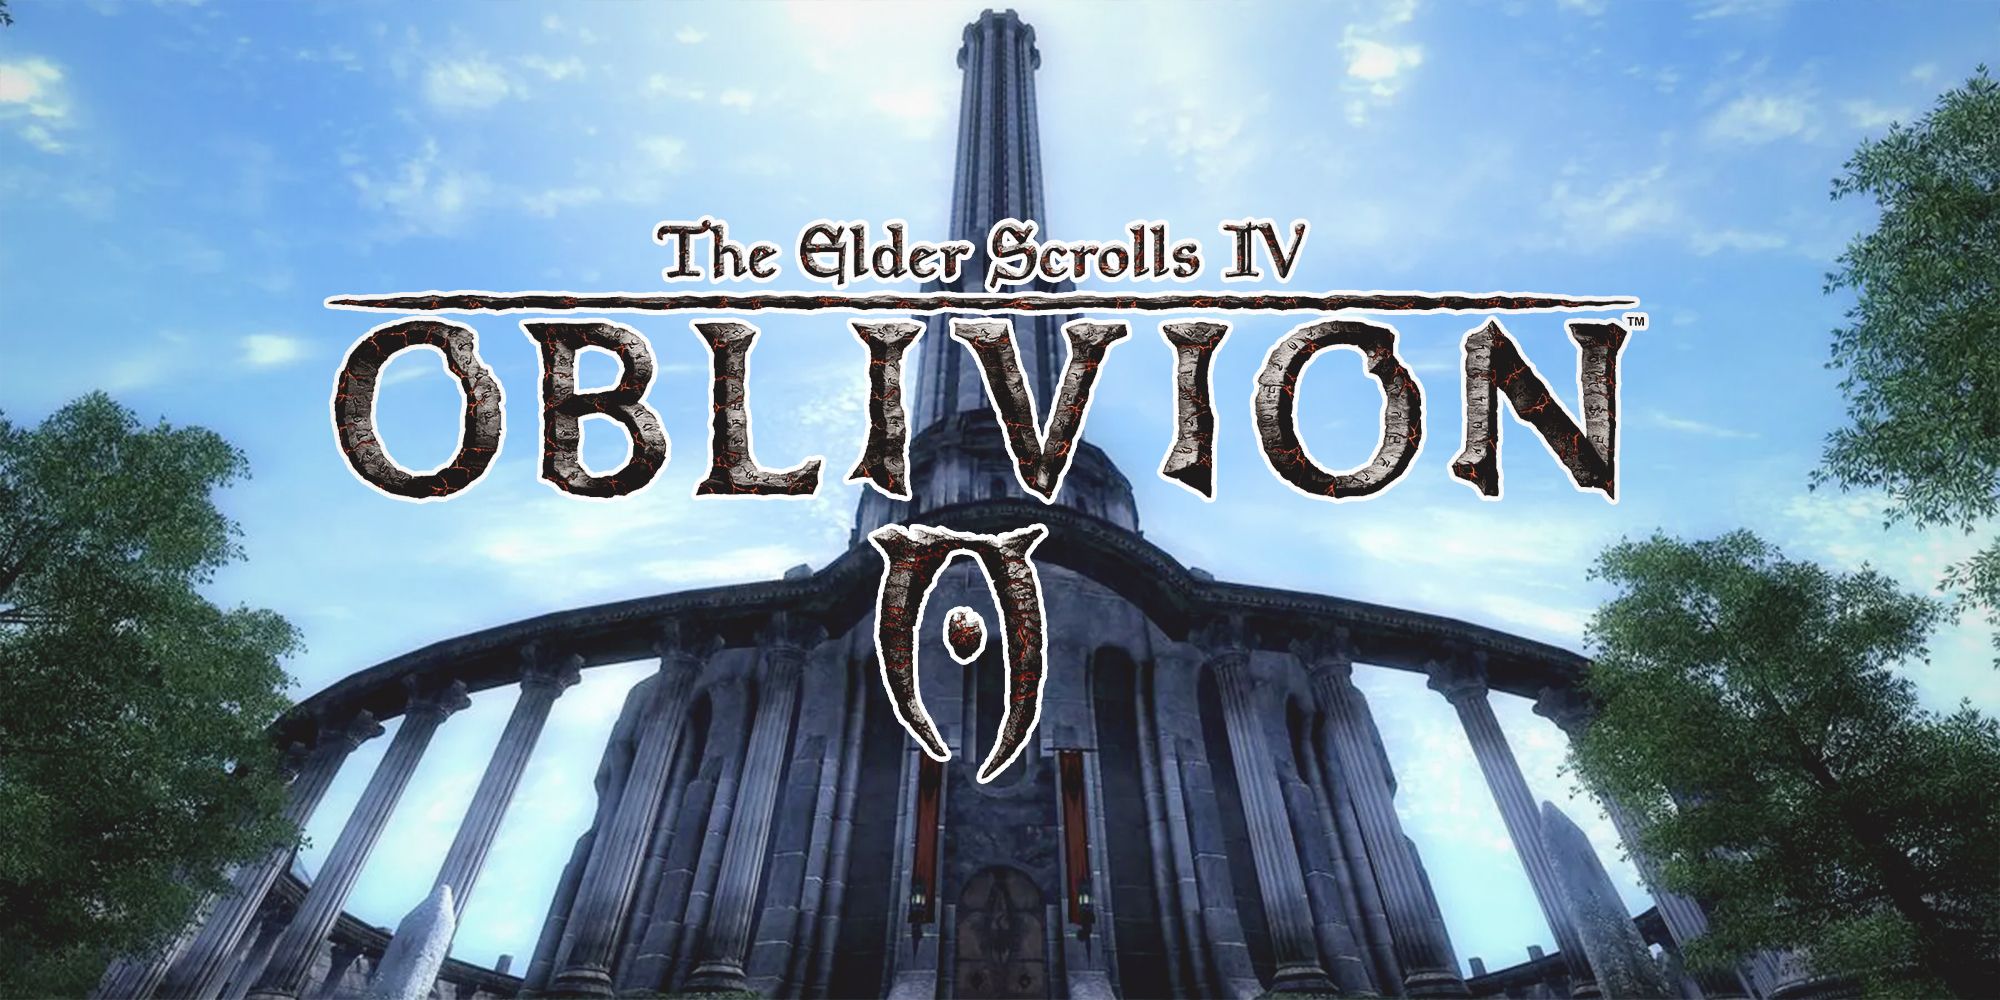 The Elder Scrolls 4 Oblivion white-gold tower and game logo